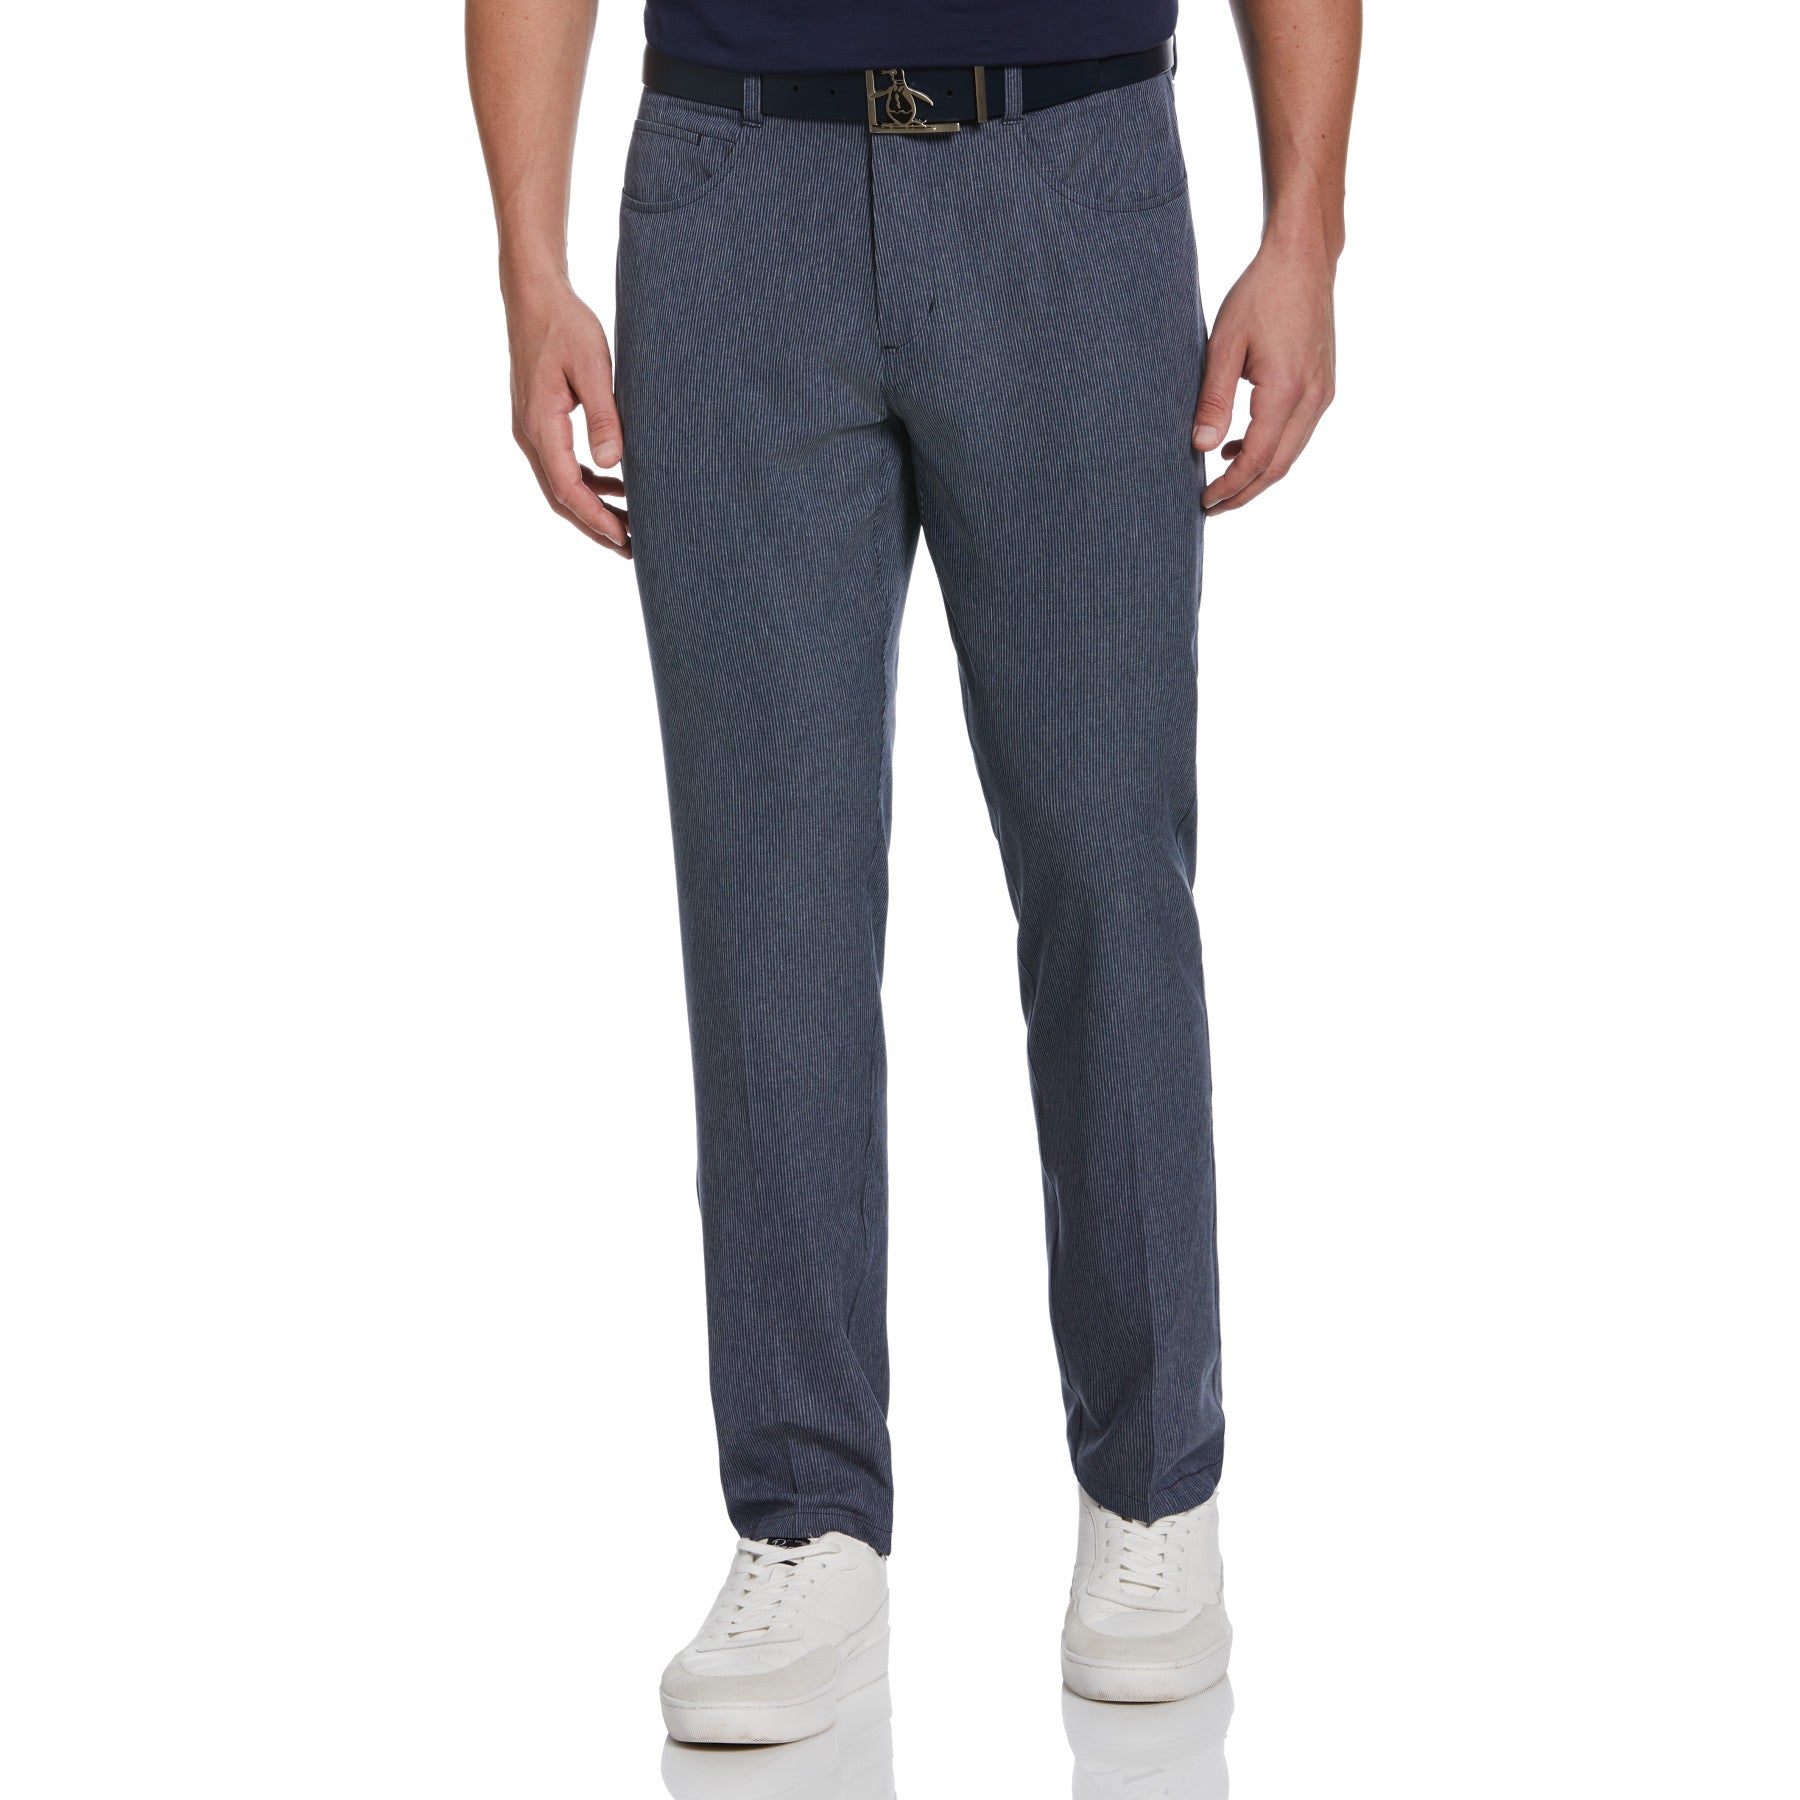 View Flat Front Fine Line Print Golf Pant In Black Iris information